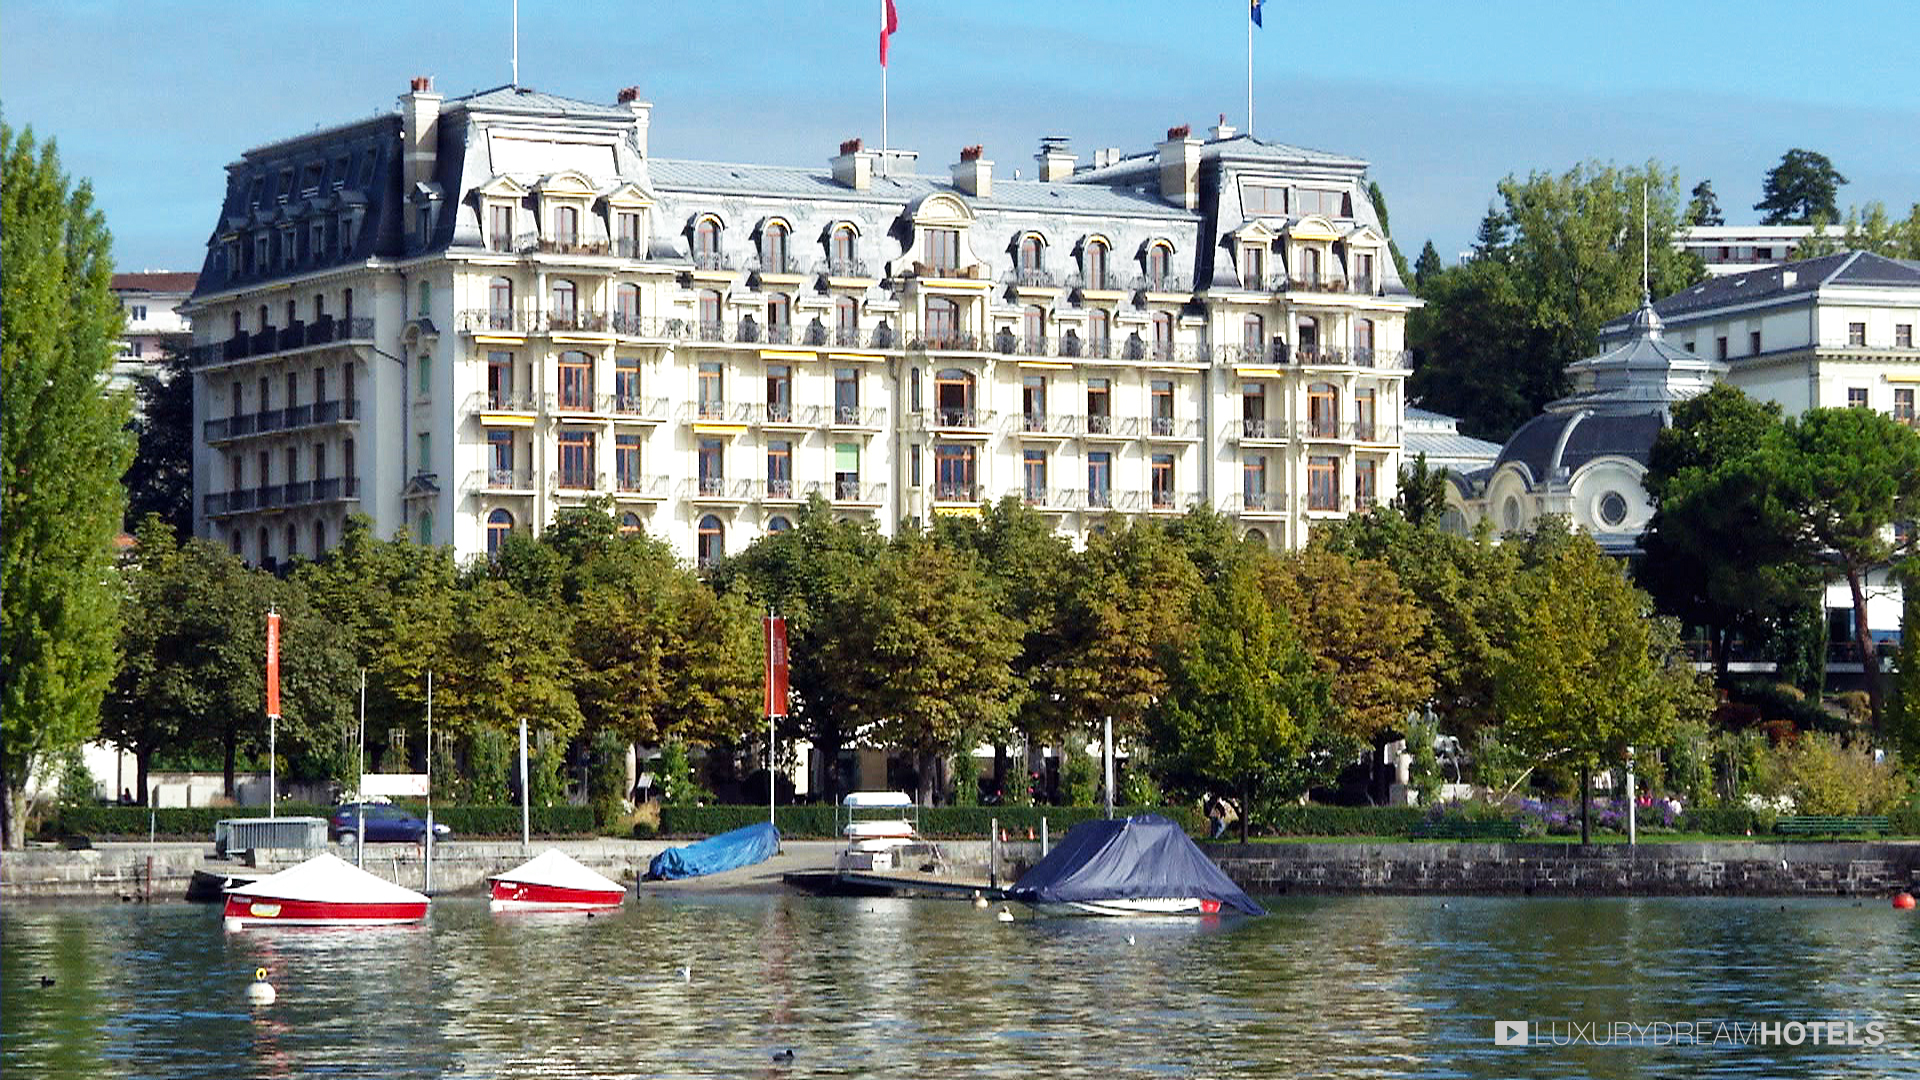 Image result for beau rivage palace lausanne